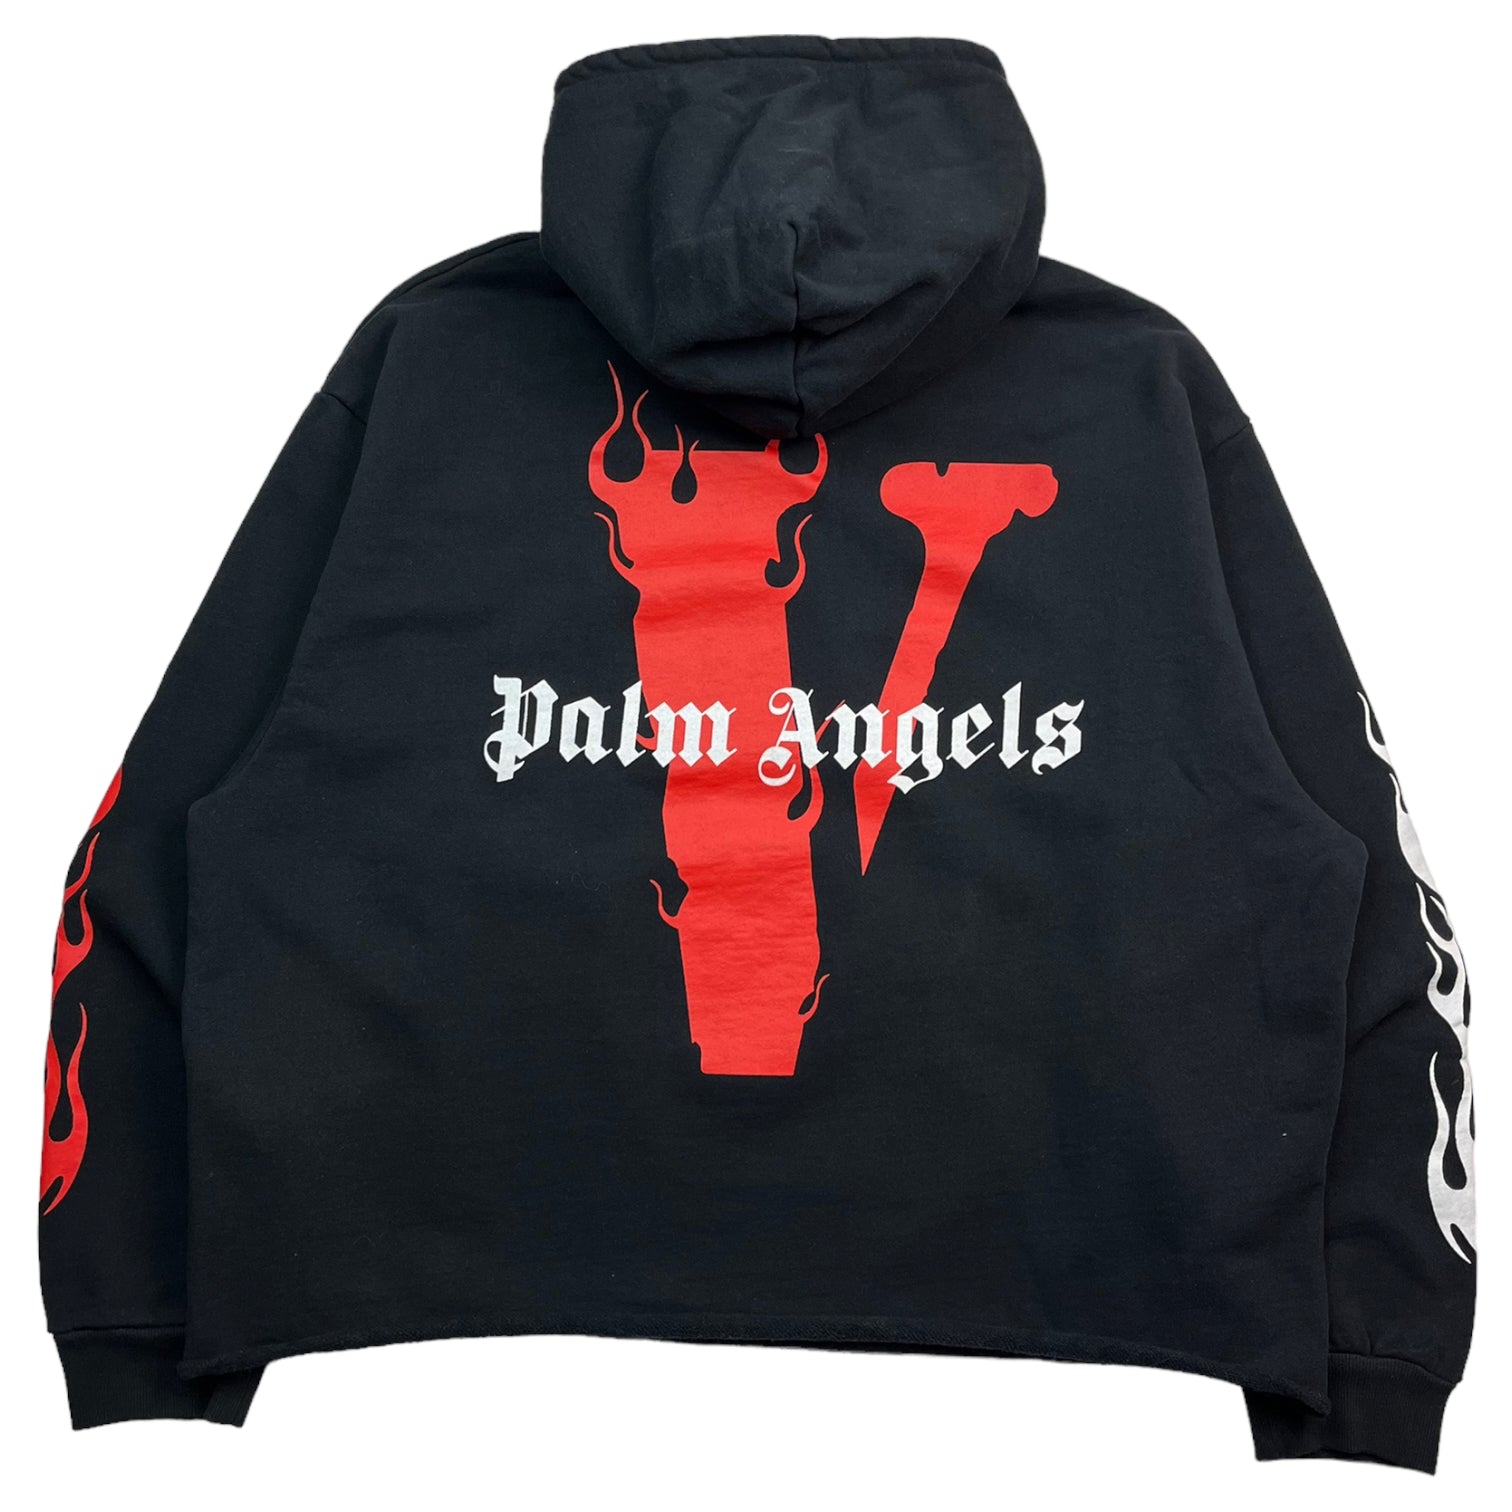 compare stores Authentic Vlone x Palm Angels T-Shirt